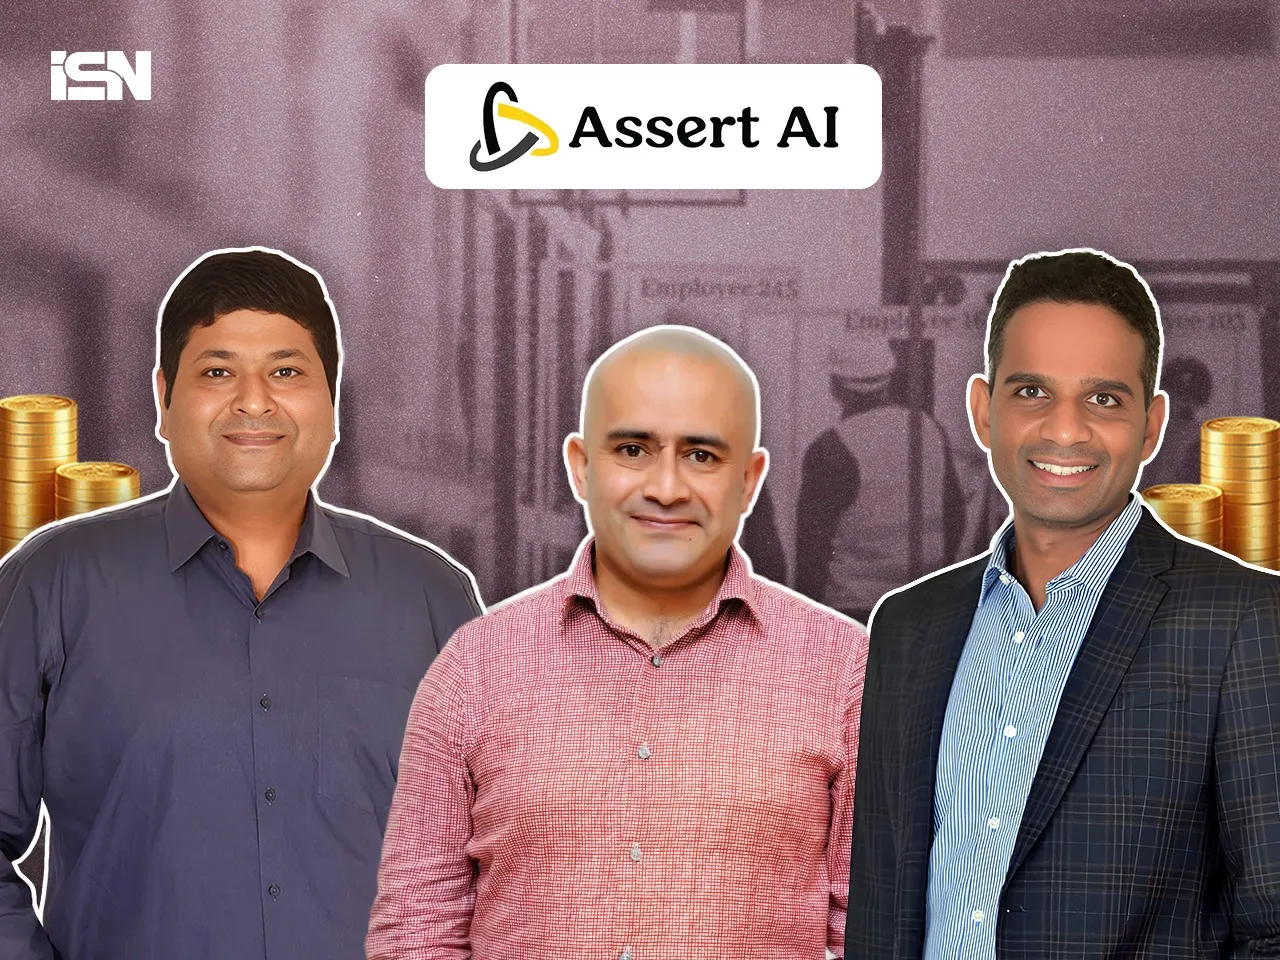 Computer Vision SaaS startup Assert AI raises $4M in a Series A funding round